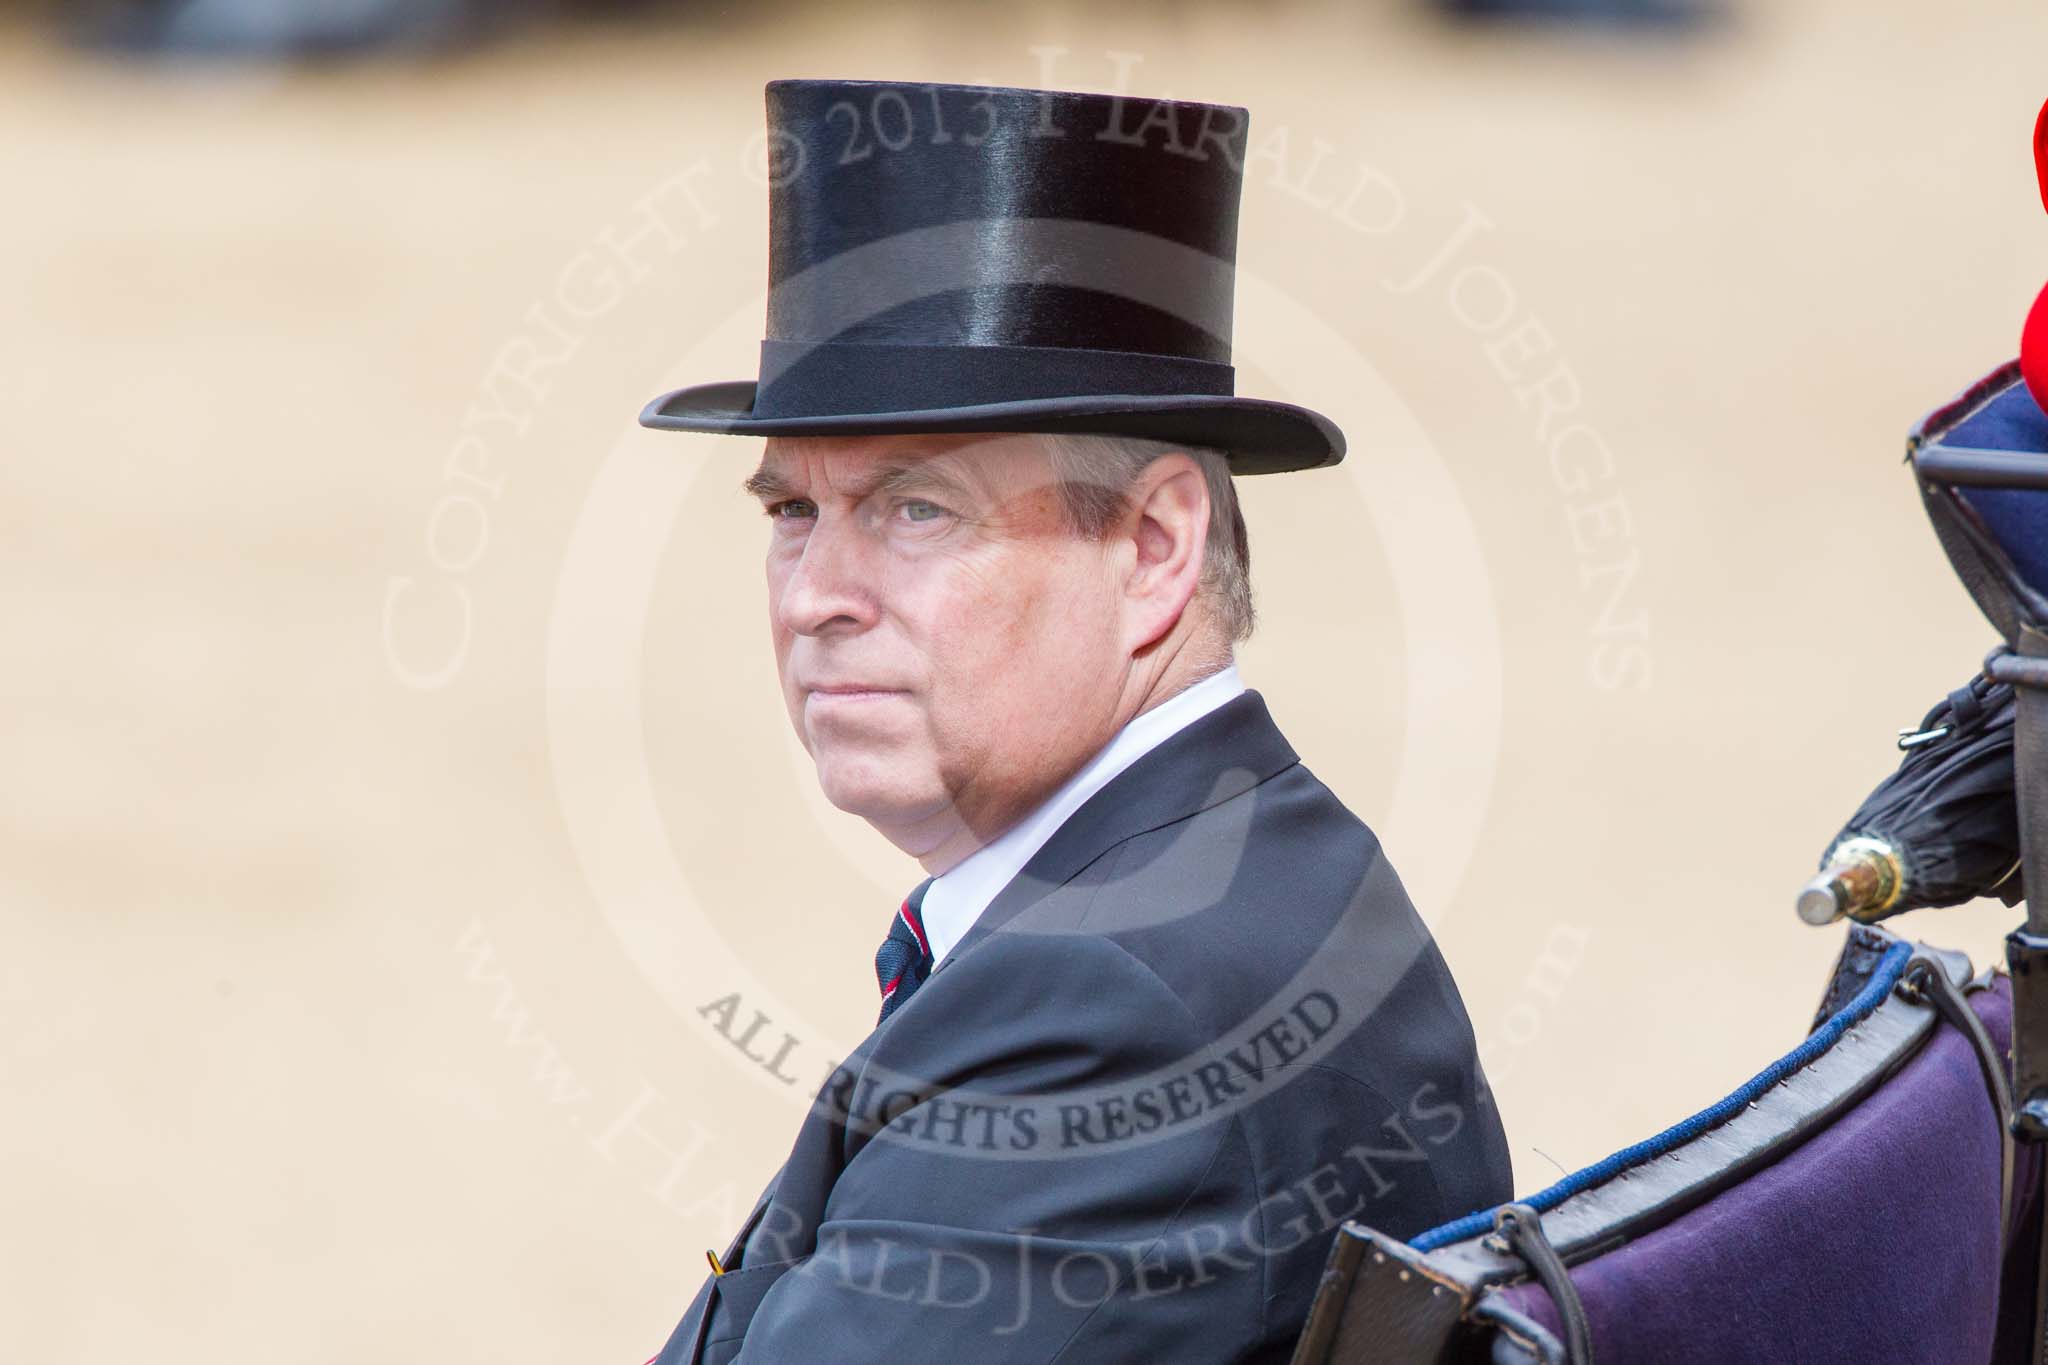 Trooping the Colour 2013: Close-up of HRH The Duke of York in the second barouche carriage on the way across Horse Guards Parade to watch the parade from the Major General's office..
Horse Guards Parade, Westminster,
London SW1,

United Kingdom,
on 15 June 2013 at 10:50, image #214